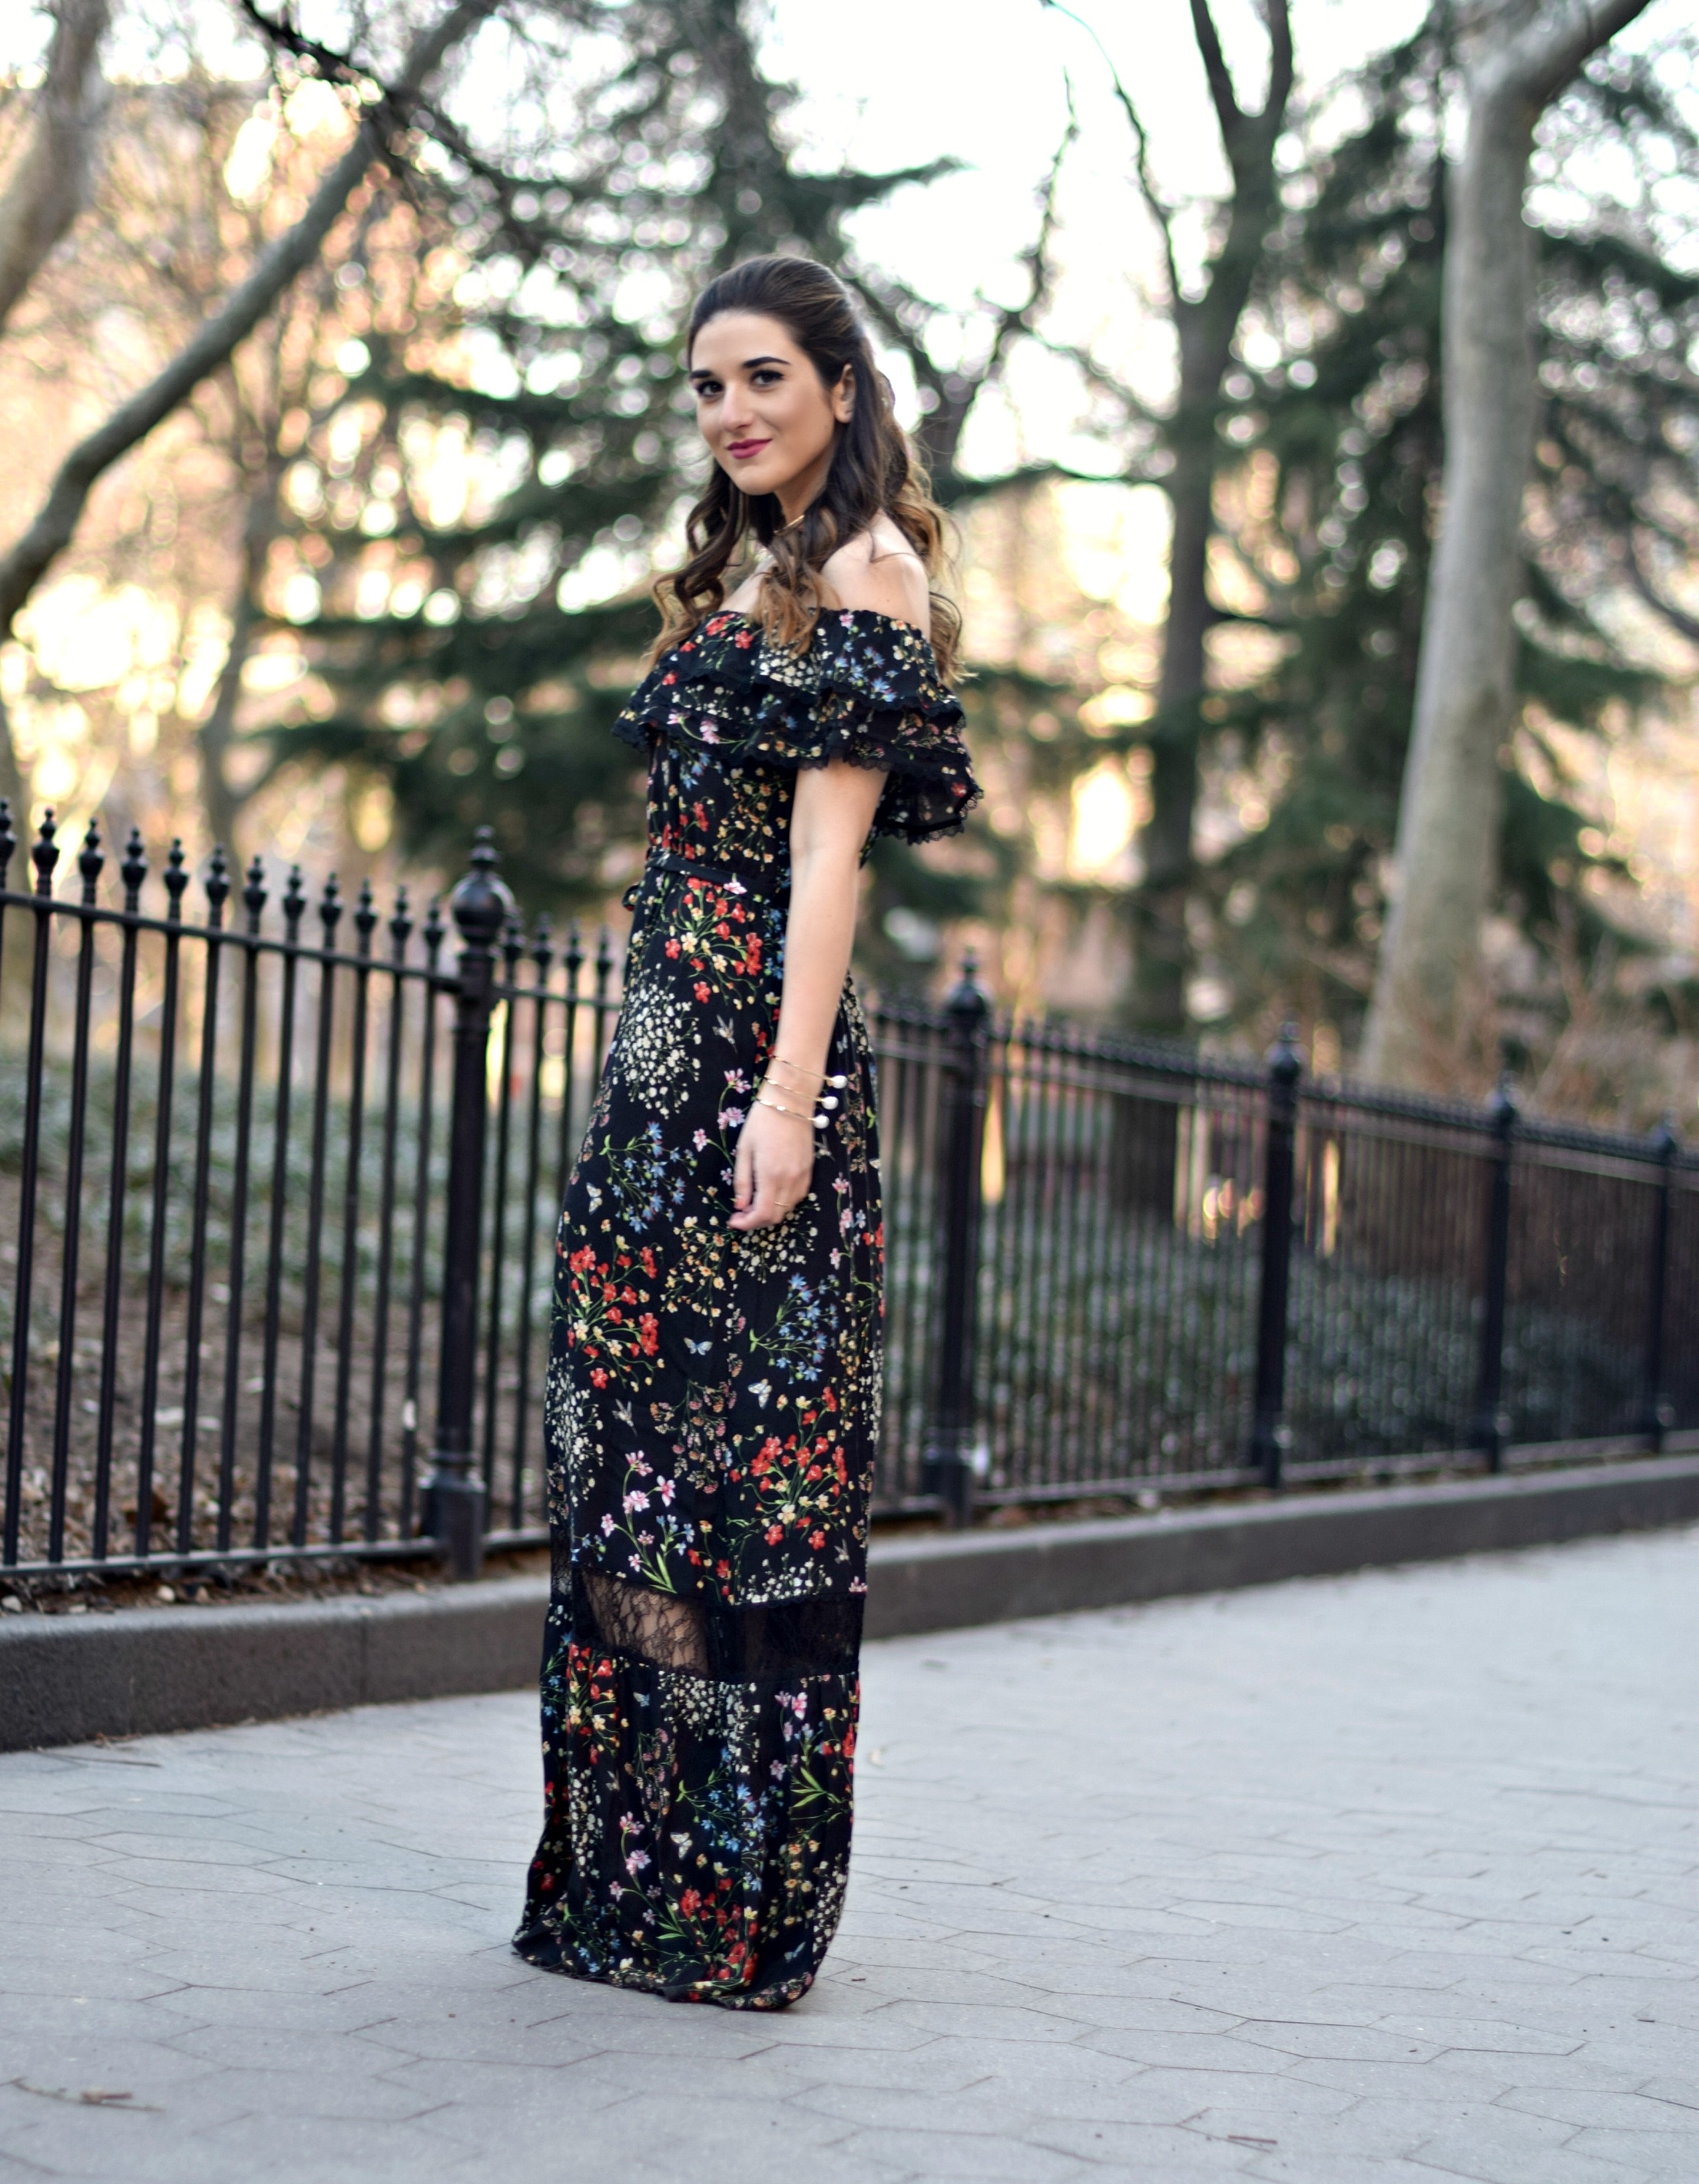 Alice Olivia Floral Dress Louboutins & Love Fashion Blog Esther Santer NYC Street Style Blogger Outfit OOTD Trunk Club Lydell Hair Brunette Model New York City Photoshoot Spring Summer Bracelet Gold Choker Jewelry Pretty Beautiful Shoulder Shoes Inspo.jpg